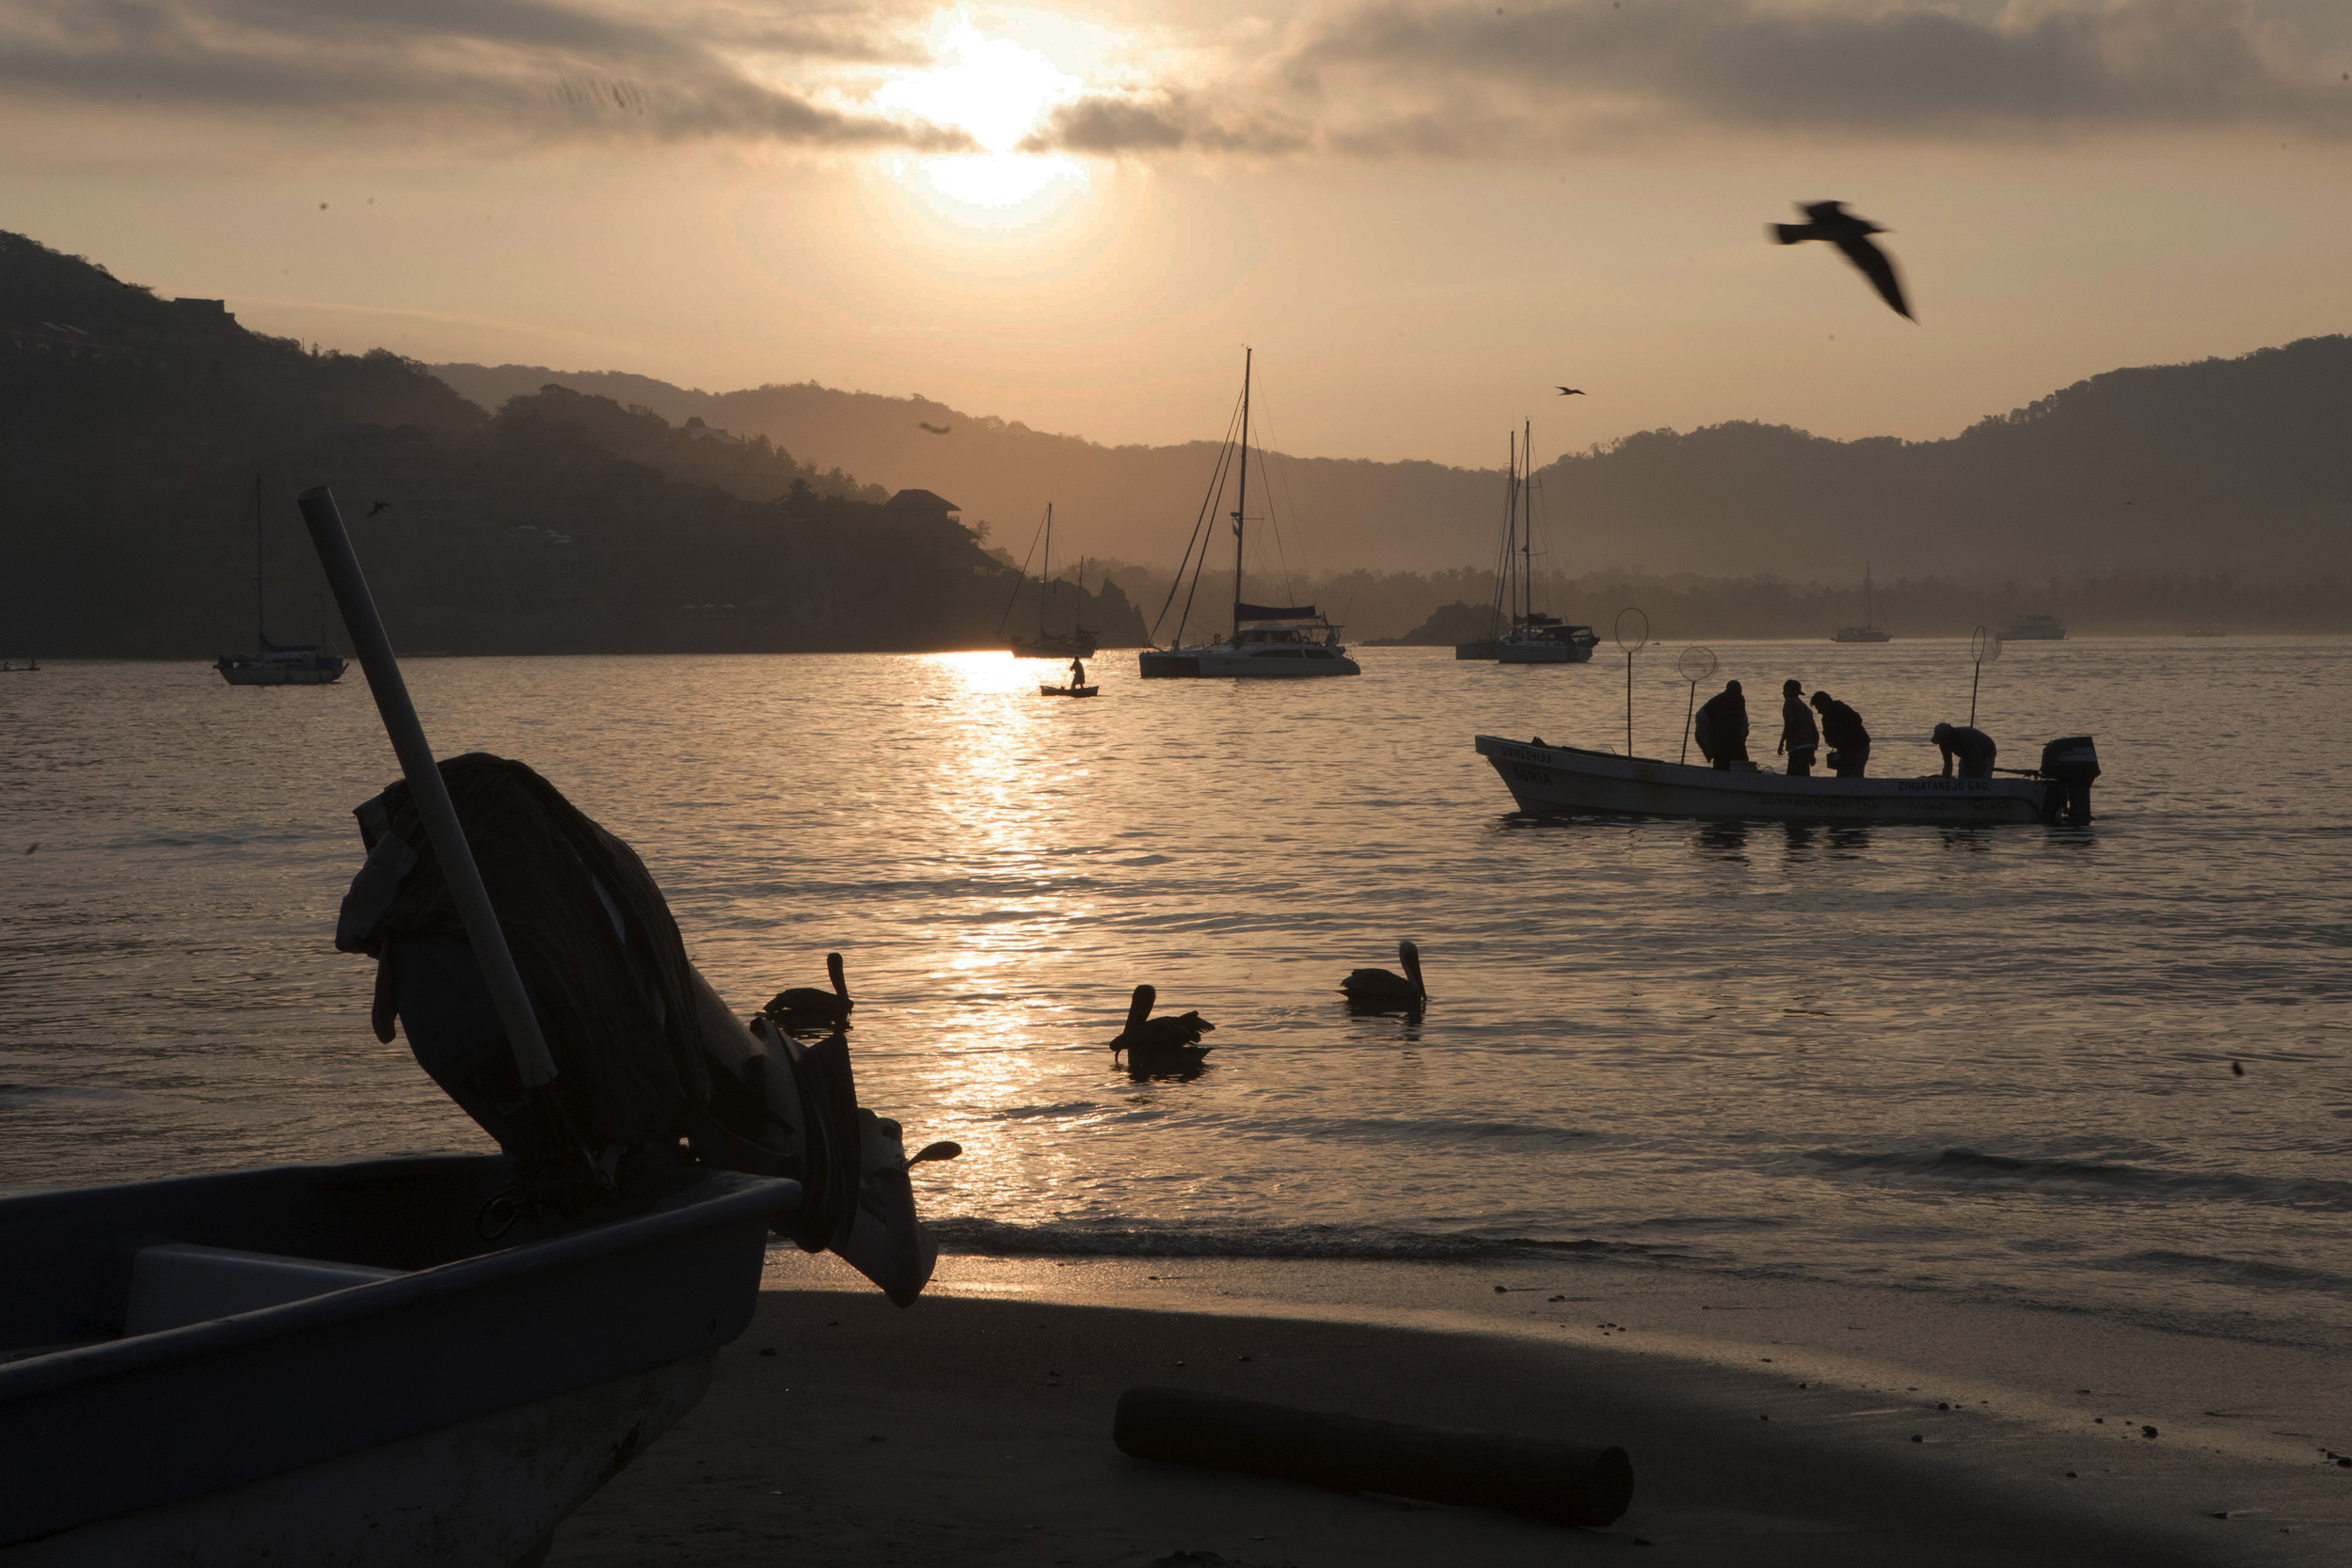  As the sun begins to rise over the calm bay, fishing boats return from a night's work to Playa Principal, the main beach in the center of town of Zihuatanejo. ©Gail Fisher&nbsp; 